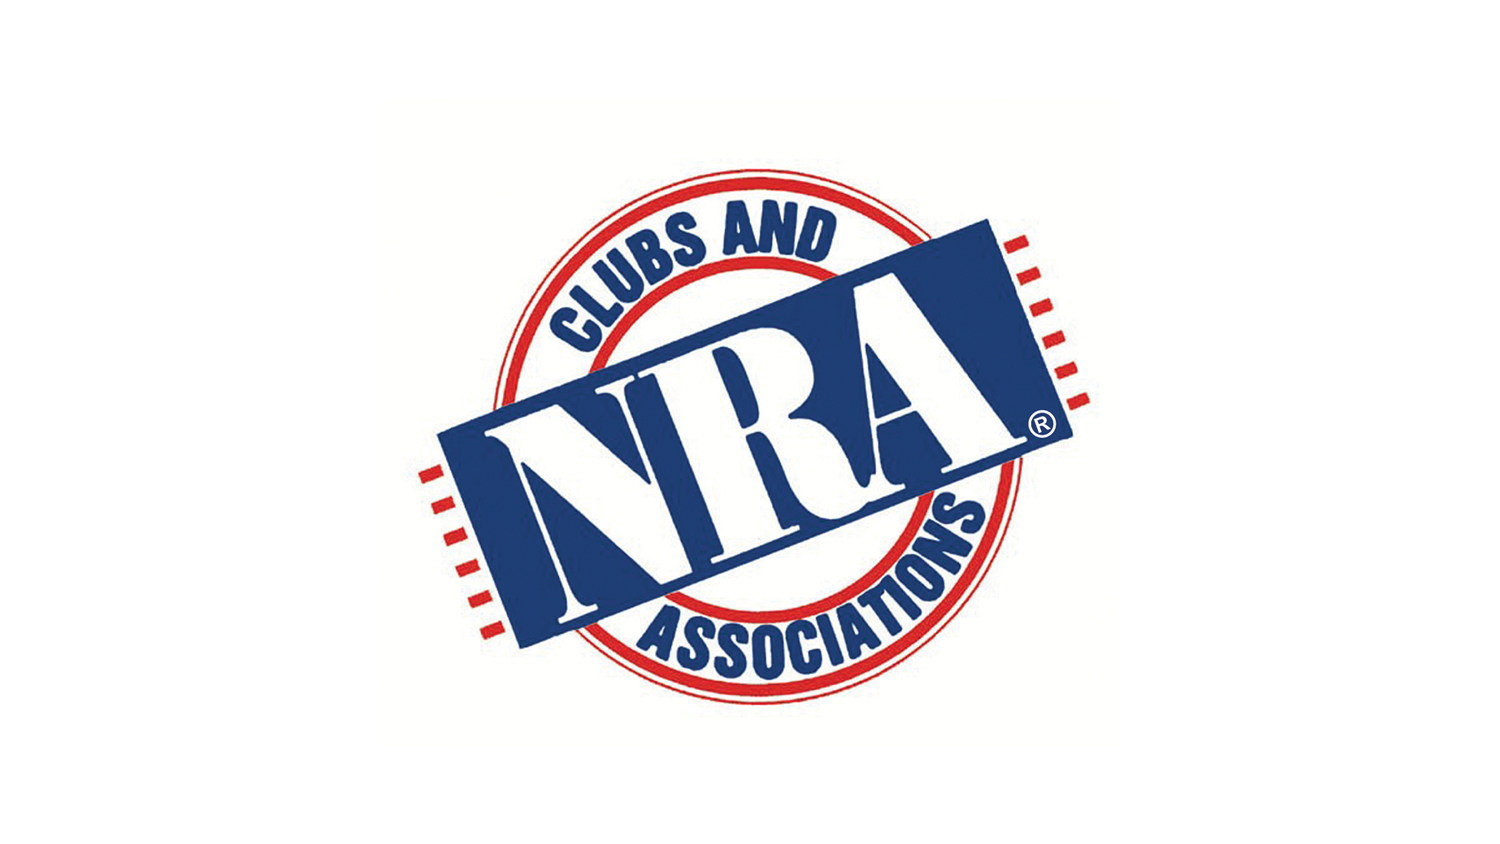 Does Your NRA Club or Association Deserve to be Recognized?